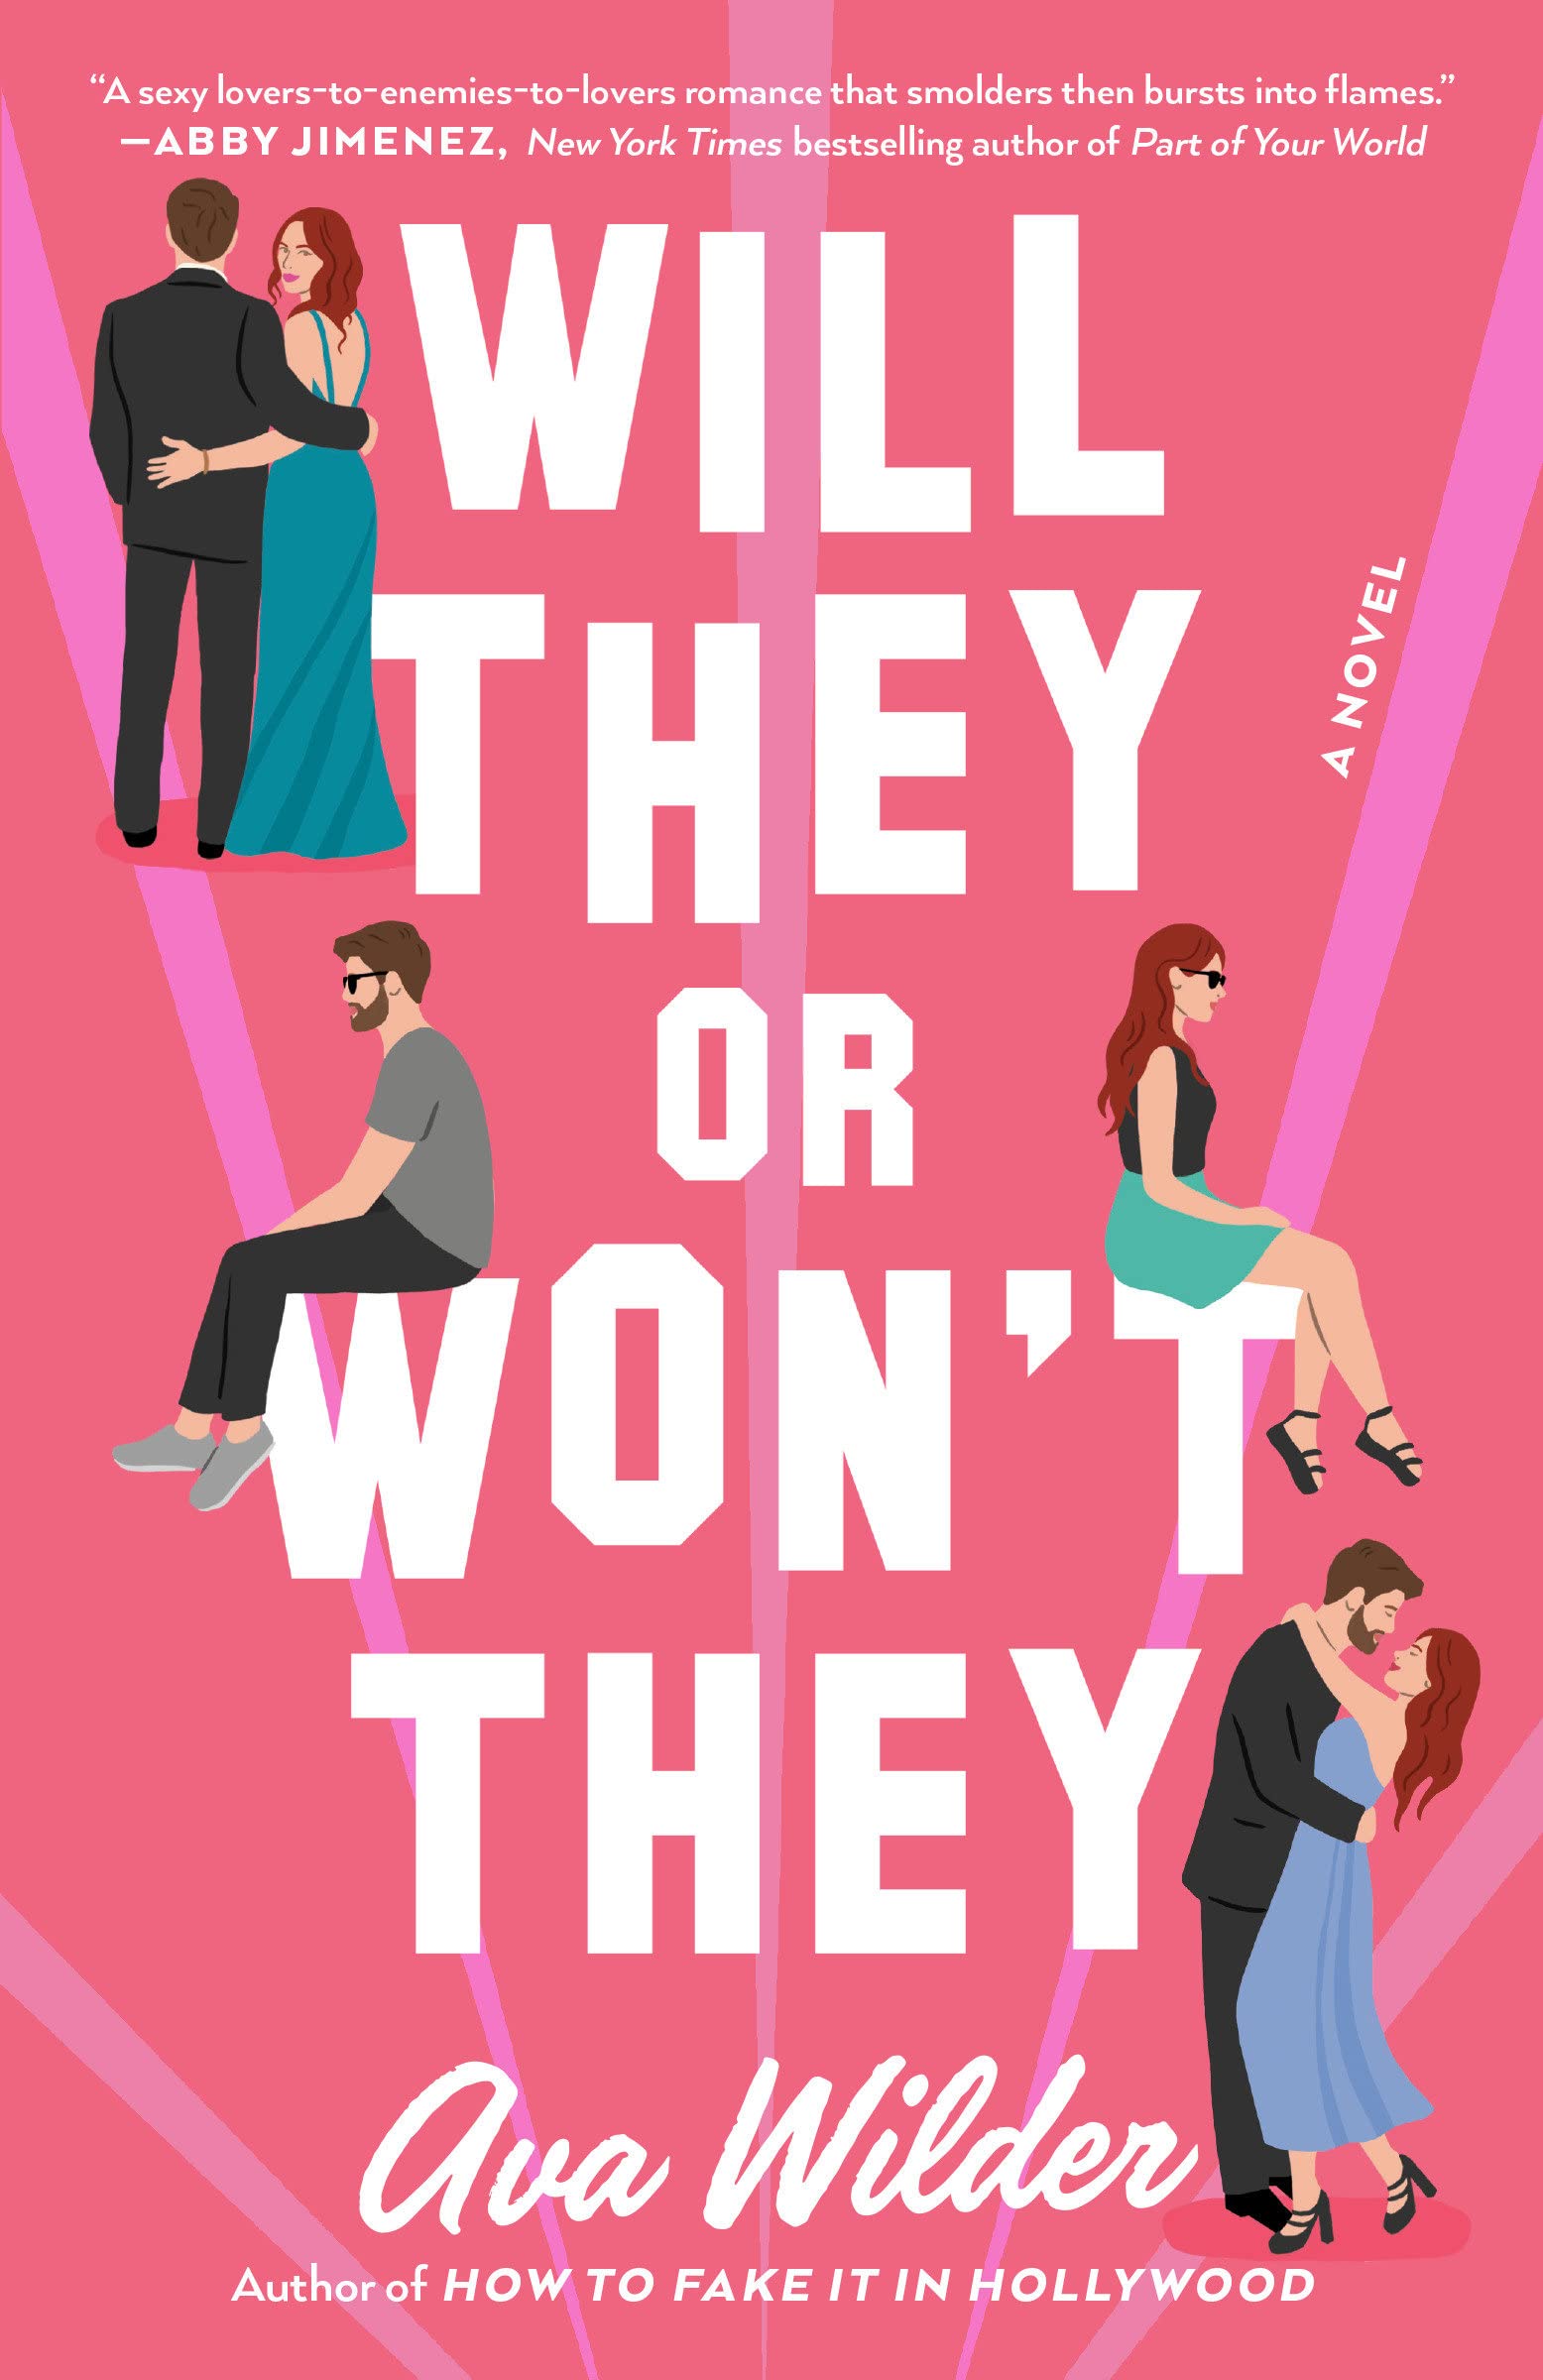 Image for "Will They or Wont They"